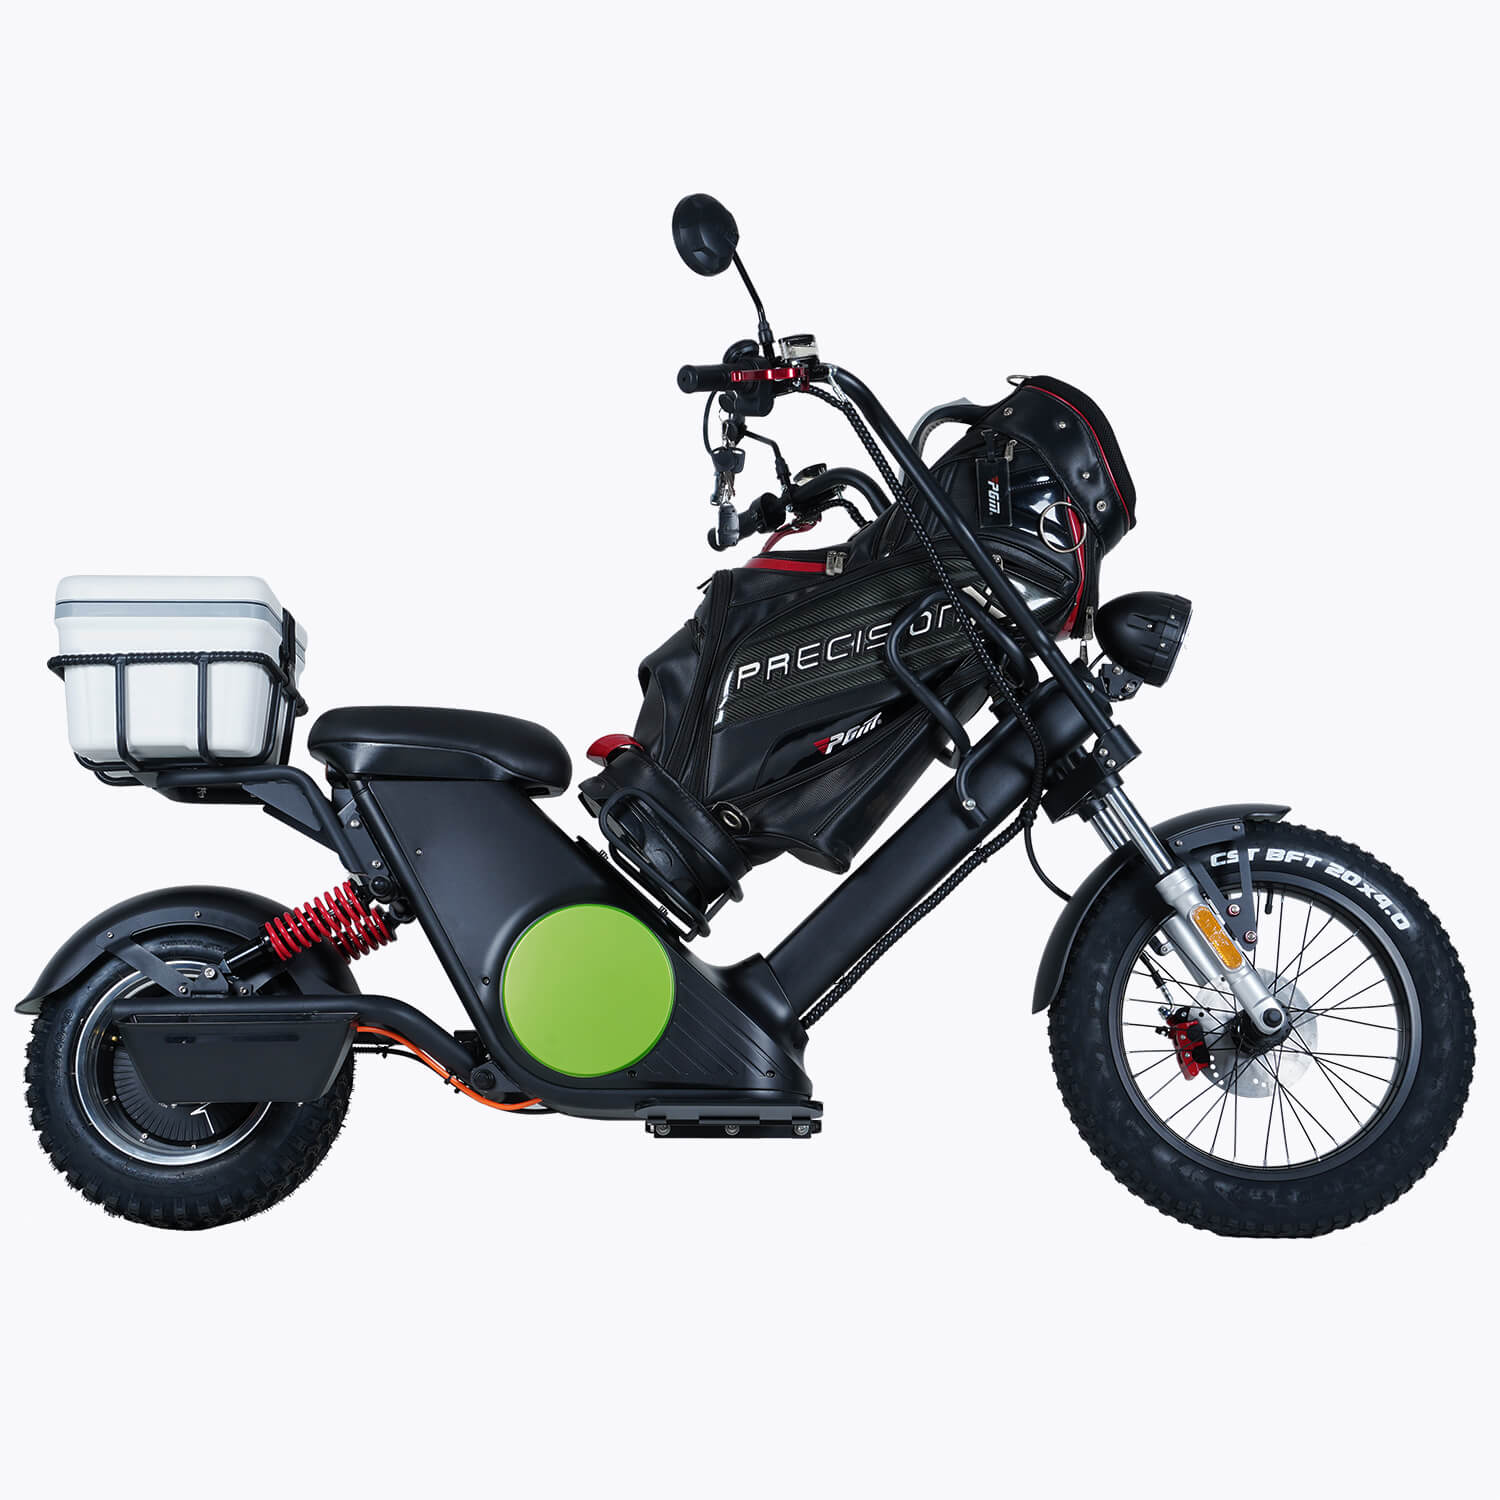 Electric Scooter Wholesale M6G